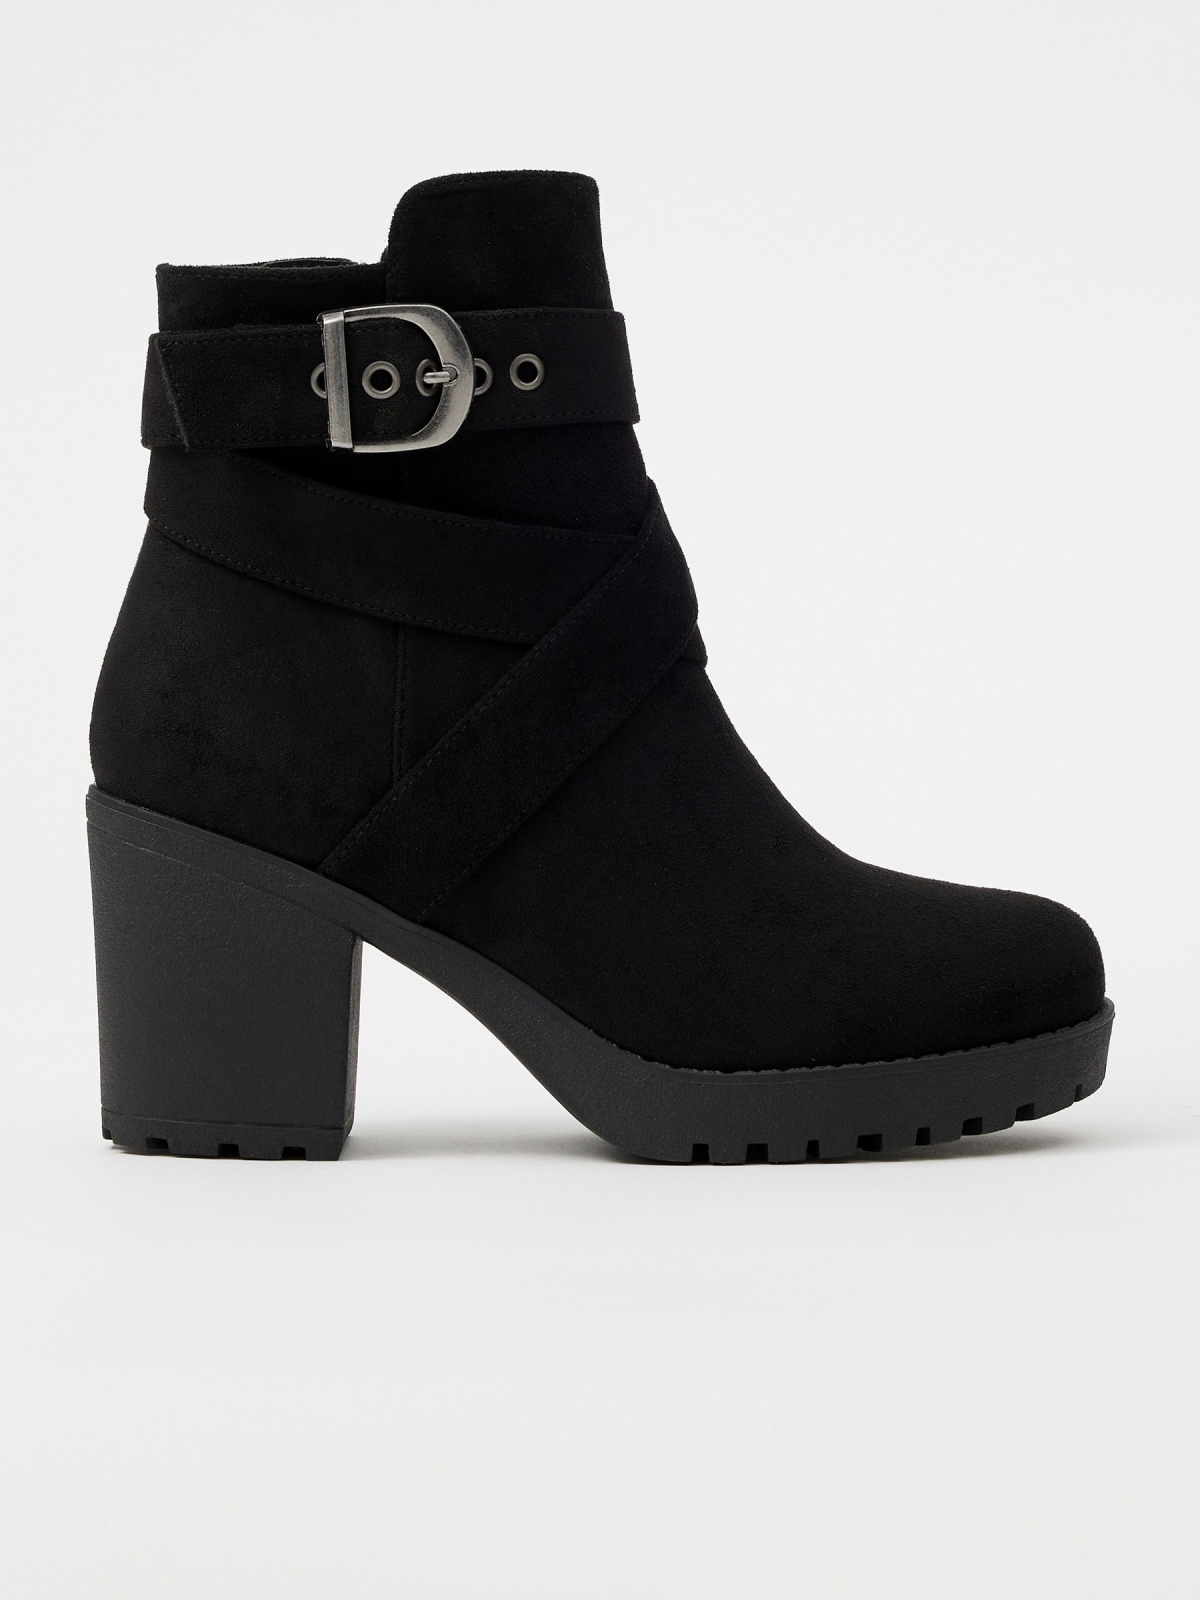 Black ankle boot with crossed straps and buckle black